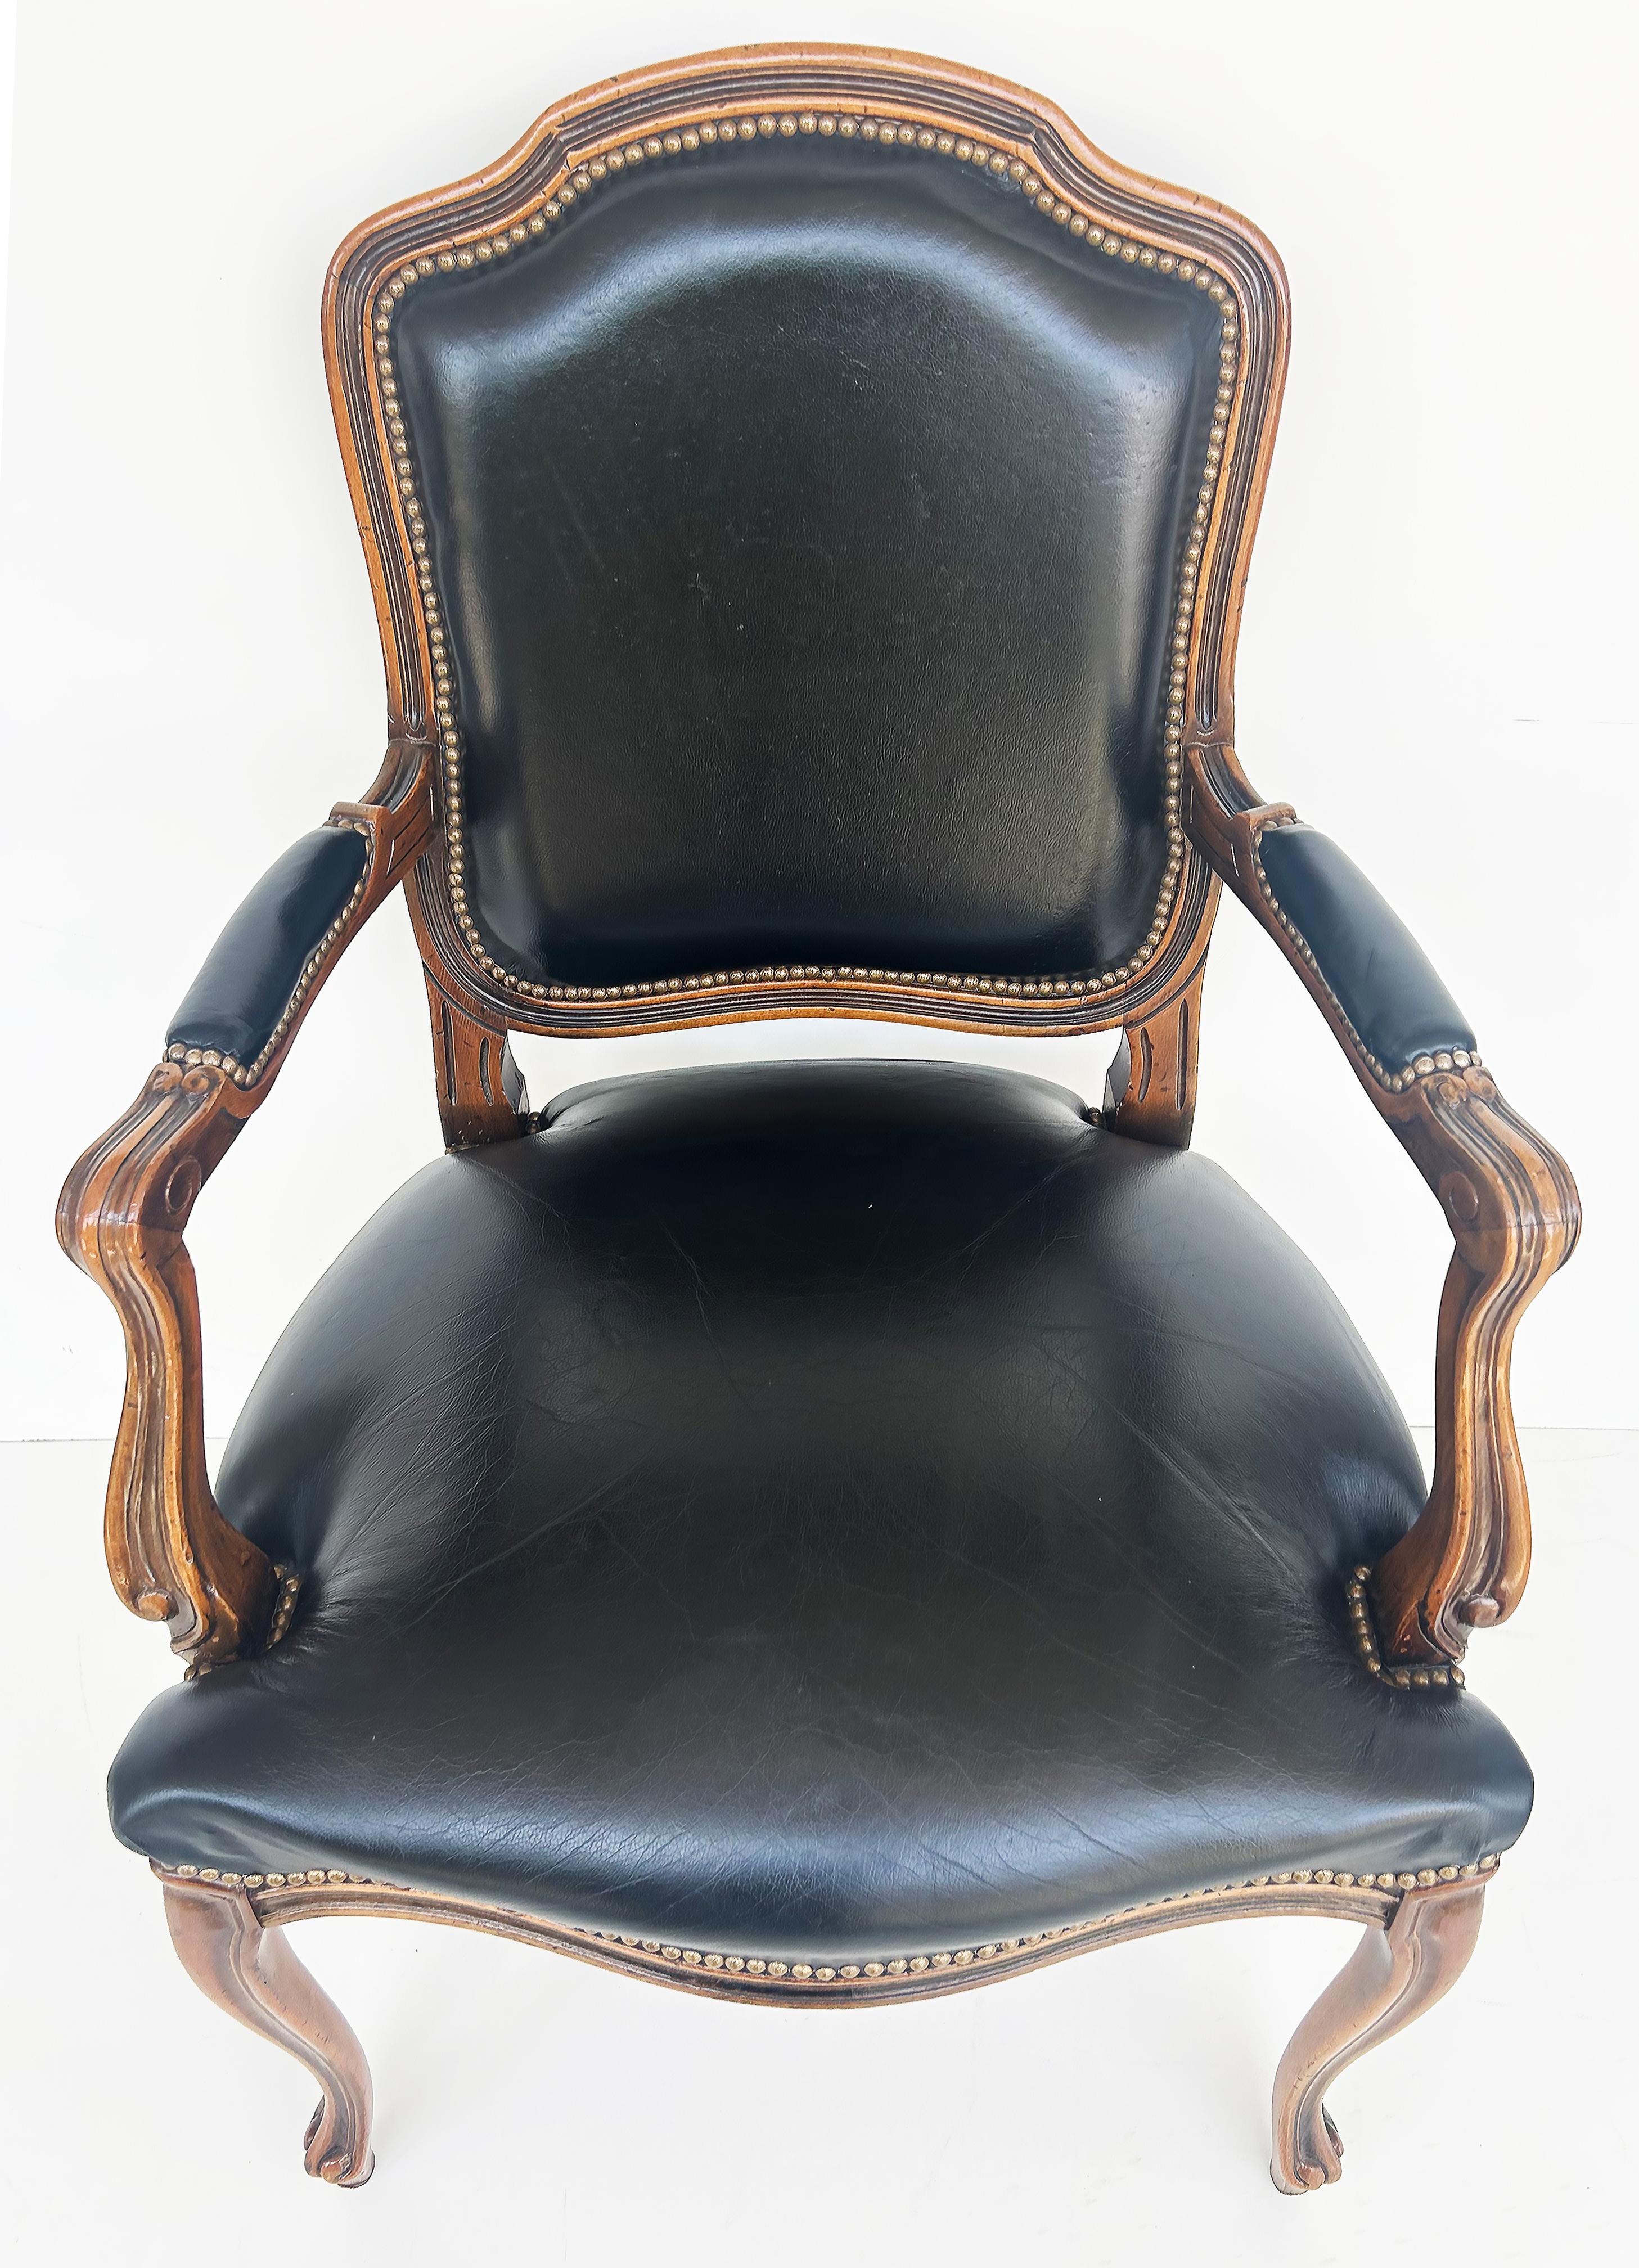 Vintage Italian Chateau D'Ax Leather Armchairs with Brass Nailhead Details, Pair For Sale 2